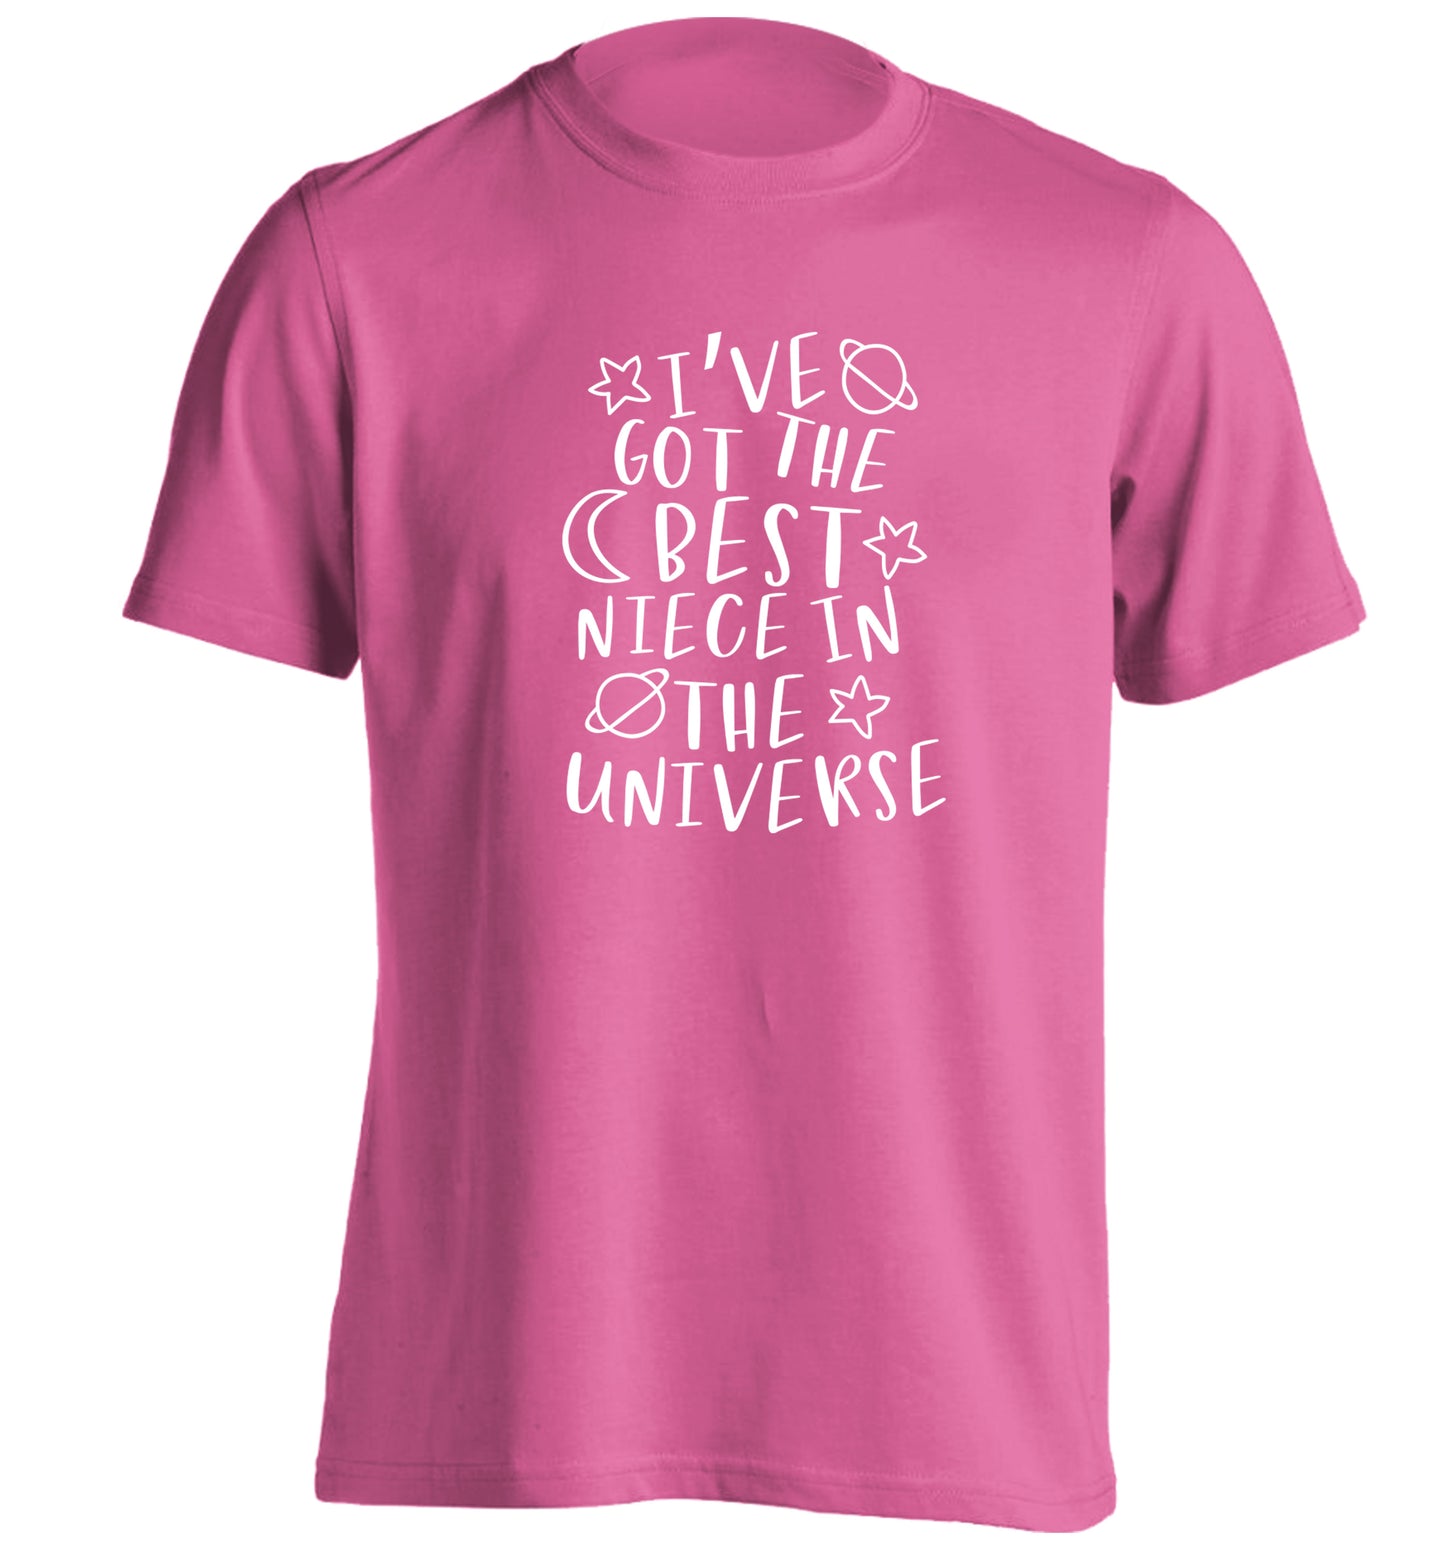 I've got the best niece in the universe adults unisex pink Tshirt 2XL